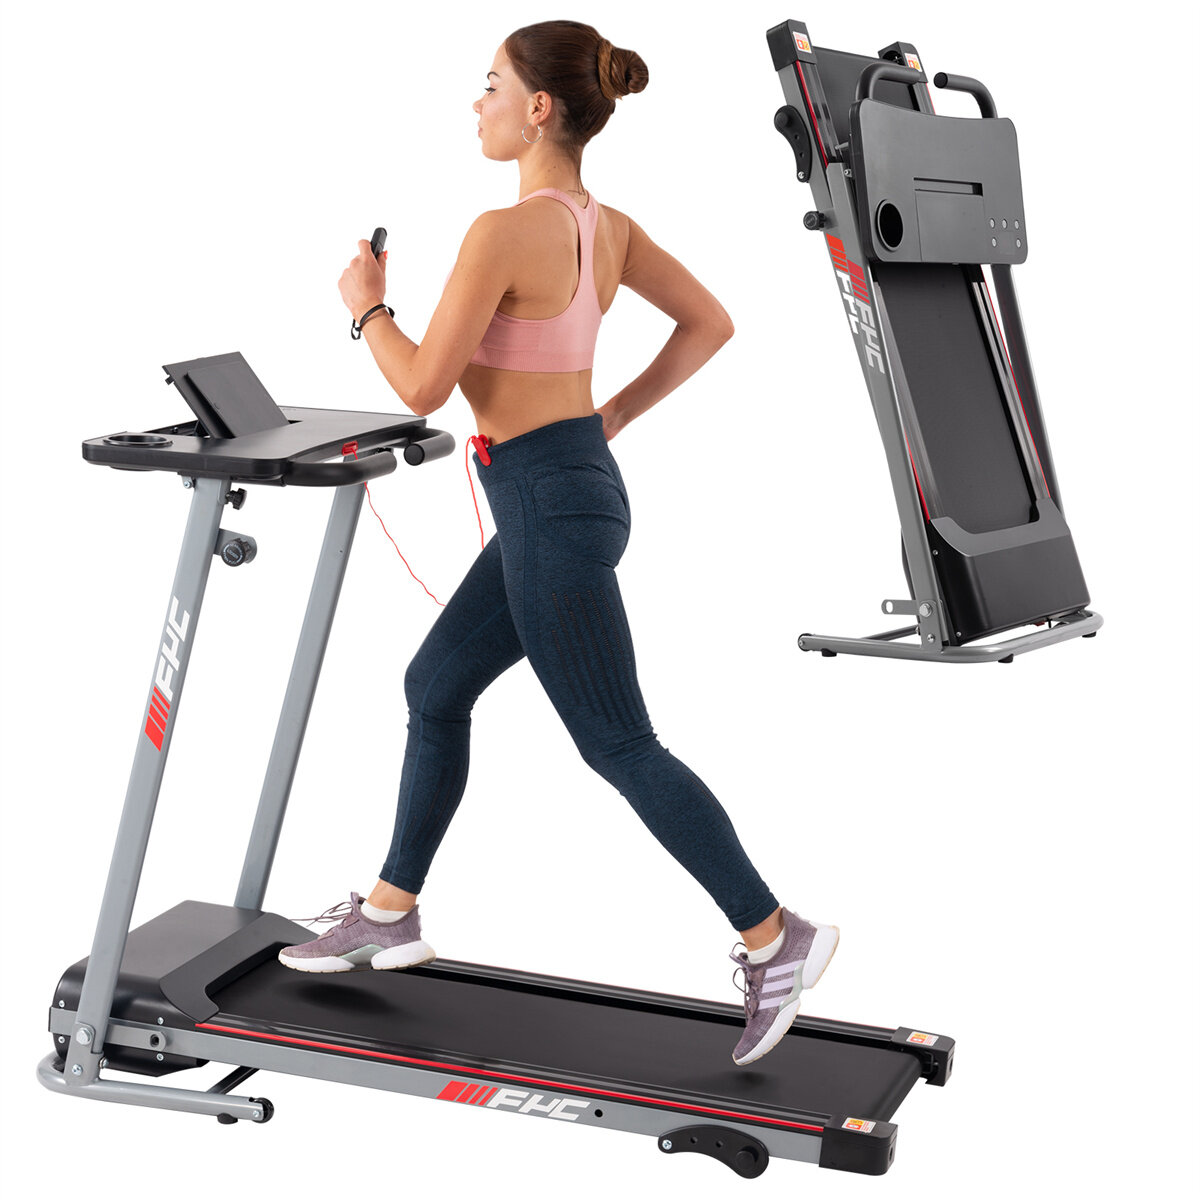 [USA Direct] FYC JK-1608-2 Folding Treadmill 2.5HP Motor 12km/h Max Speed 120kg Weight Capacity Remote Control LED Displ